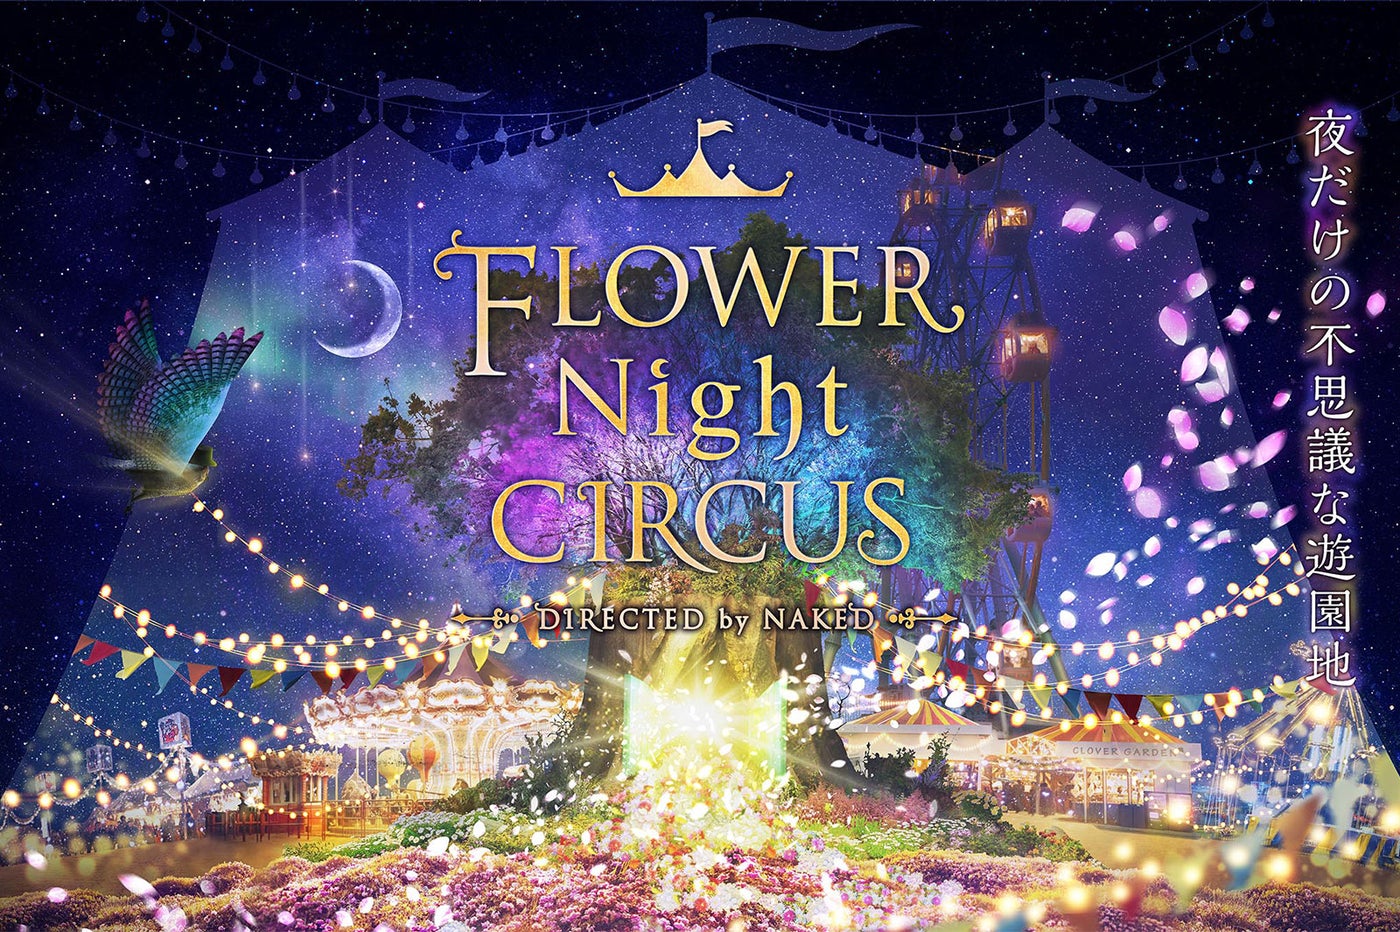 FLOWER Night CIRCUS DIRECTED by NAKED／画像提供：ネイキッド